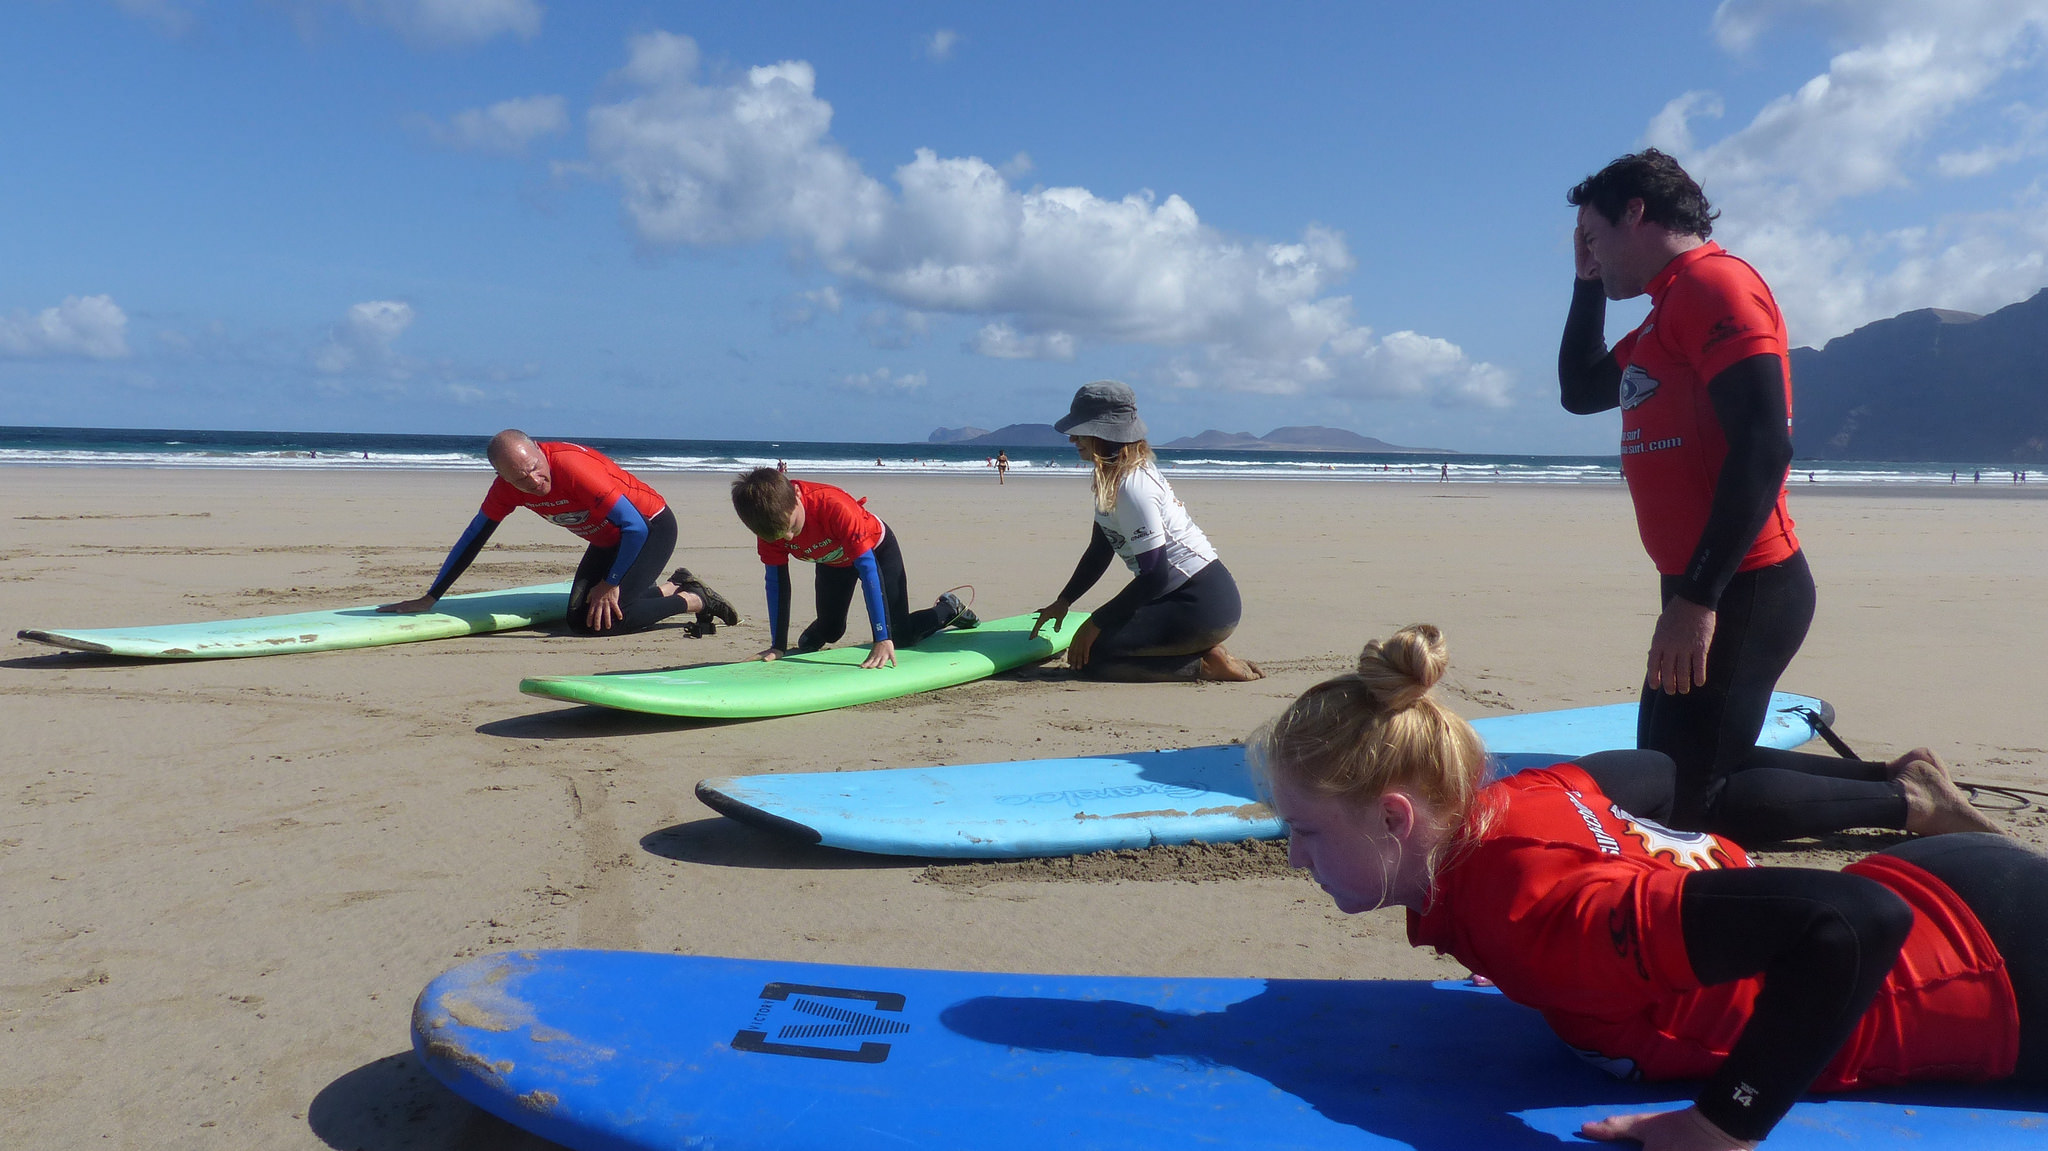 Spend your Christmas holidays practicing a different sport: Surfing in The Canary Islands!